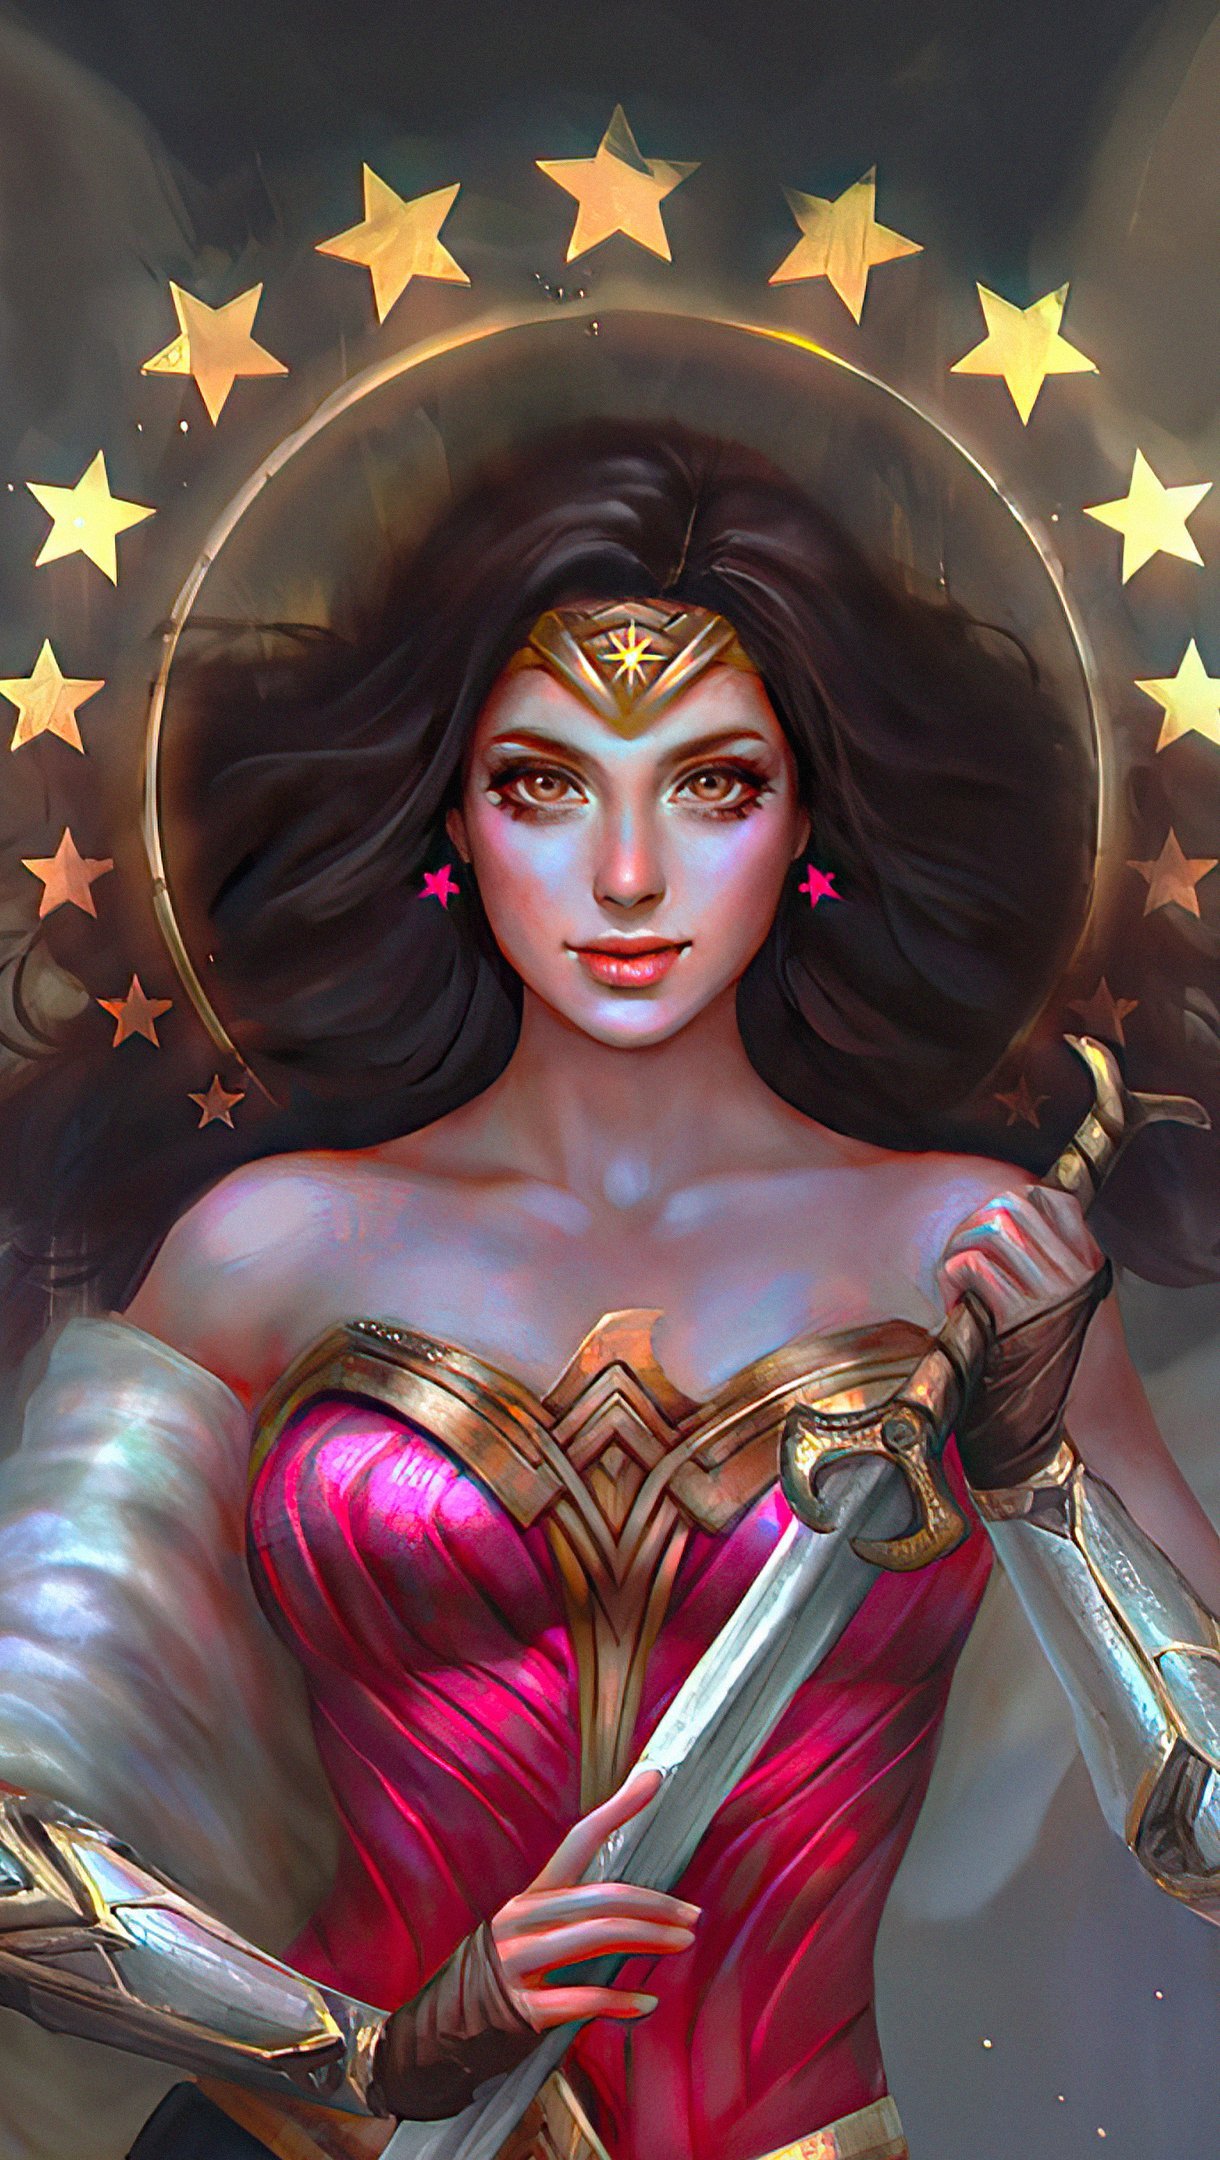 Wonder Woman with halo and sword Wallpaper 4k Ultra HD ID:6042